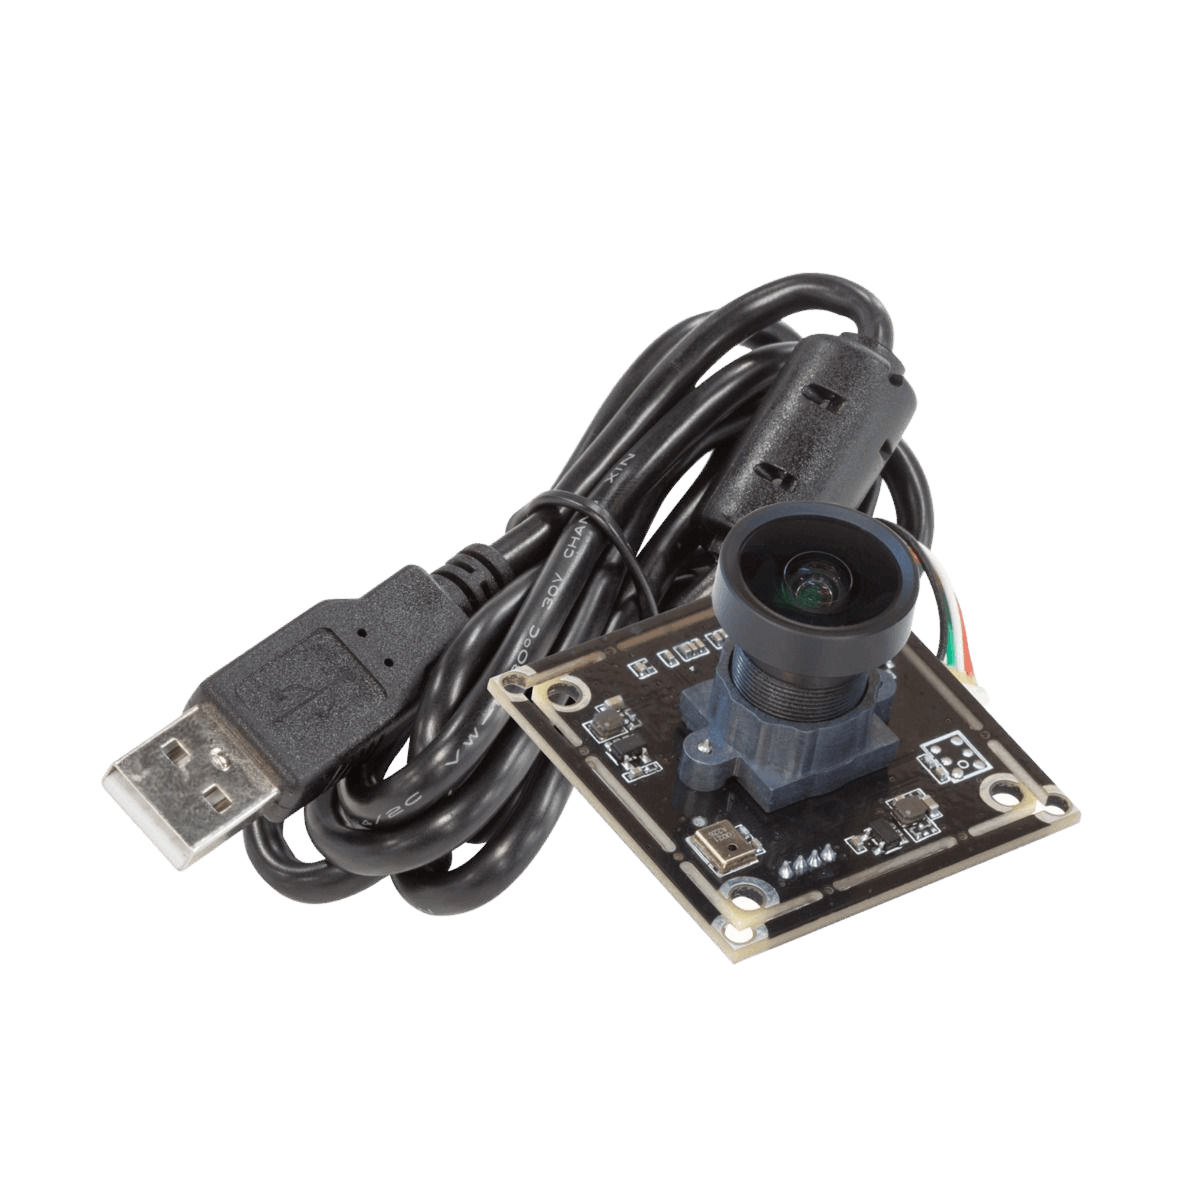 Arducam B0446 8MP IMX179 Camera Module with USB cable